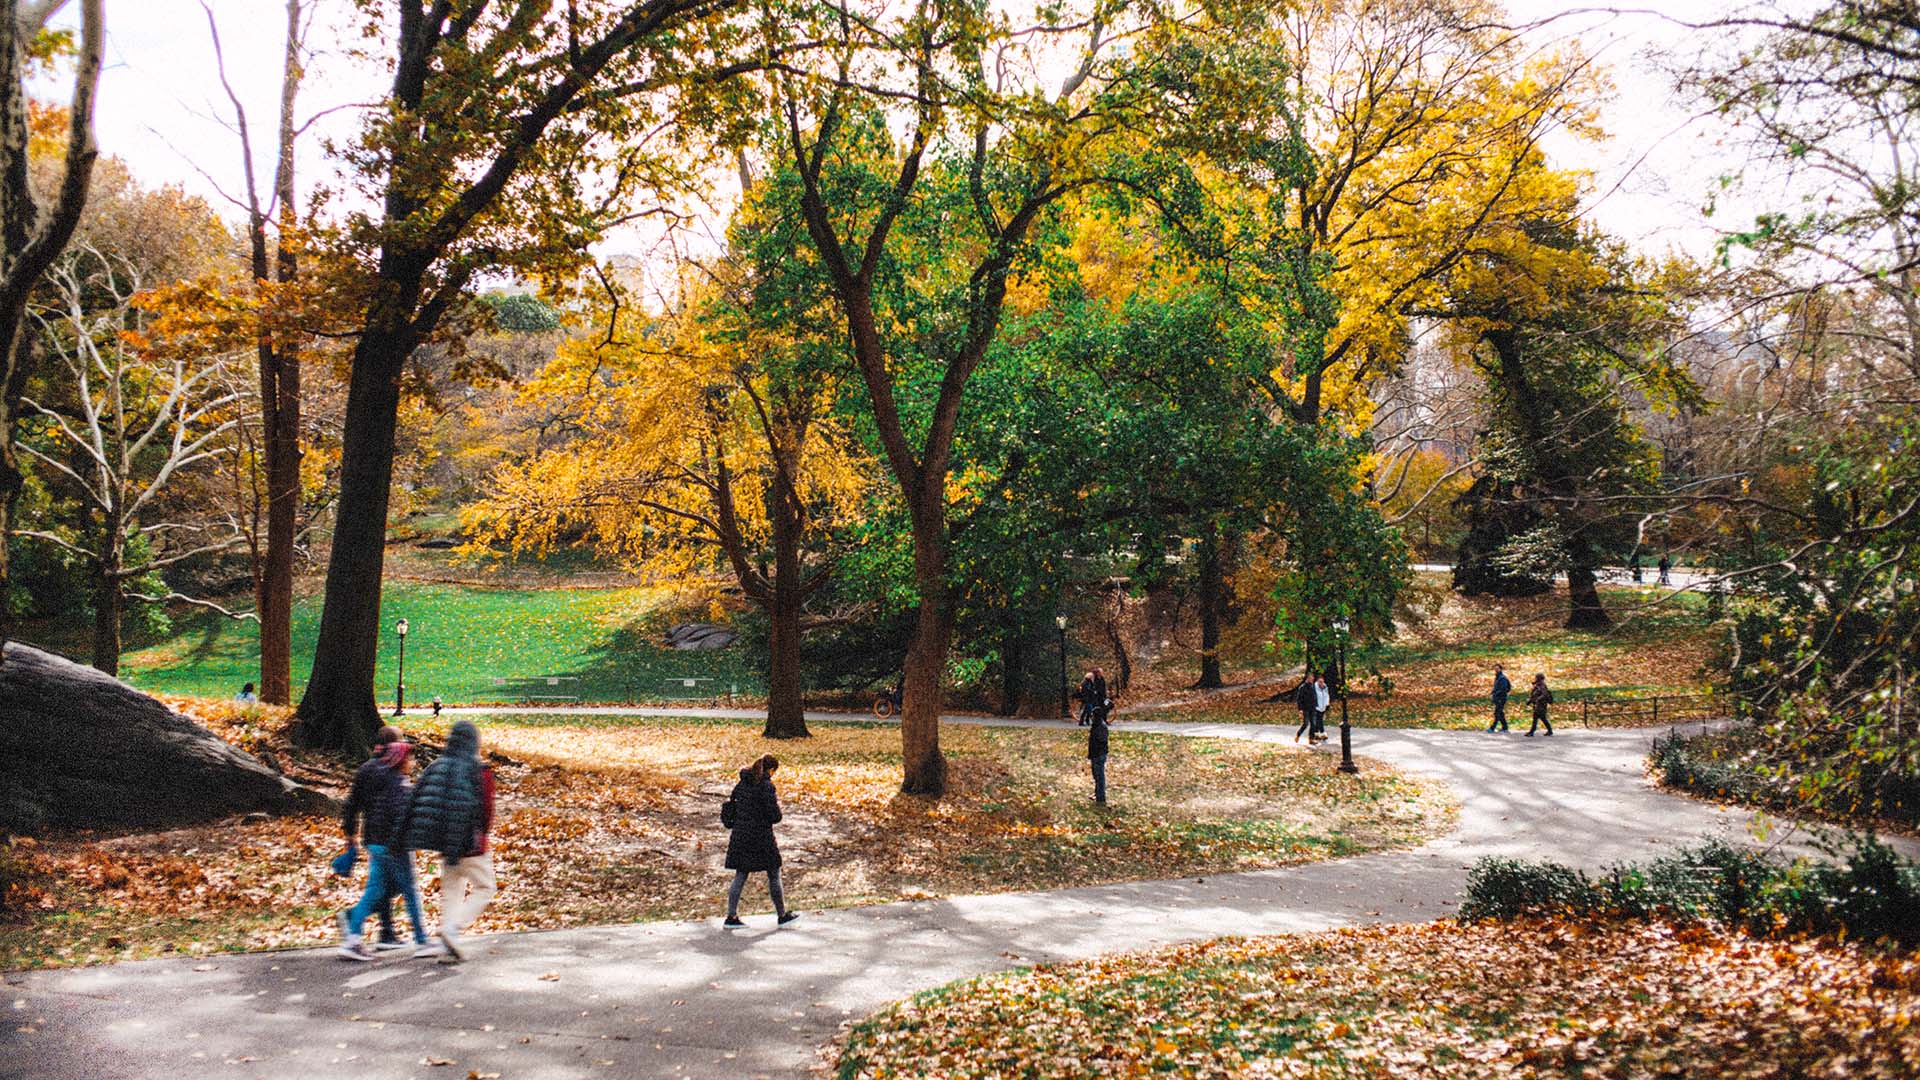 Central park in the fall